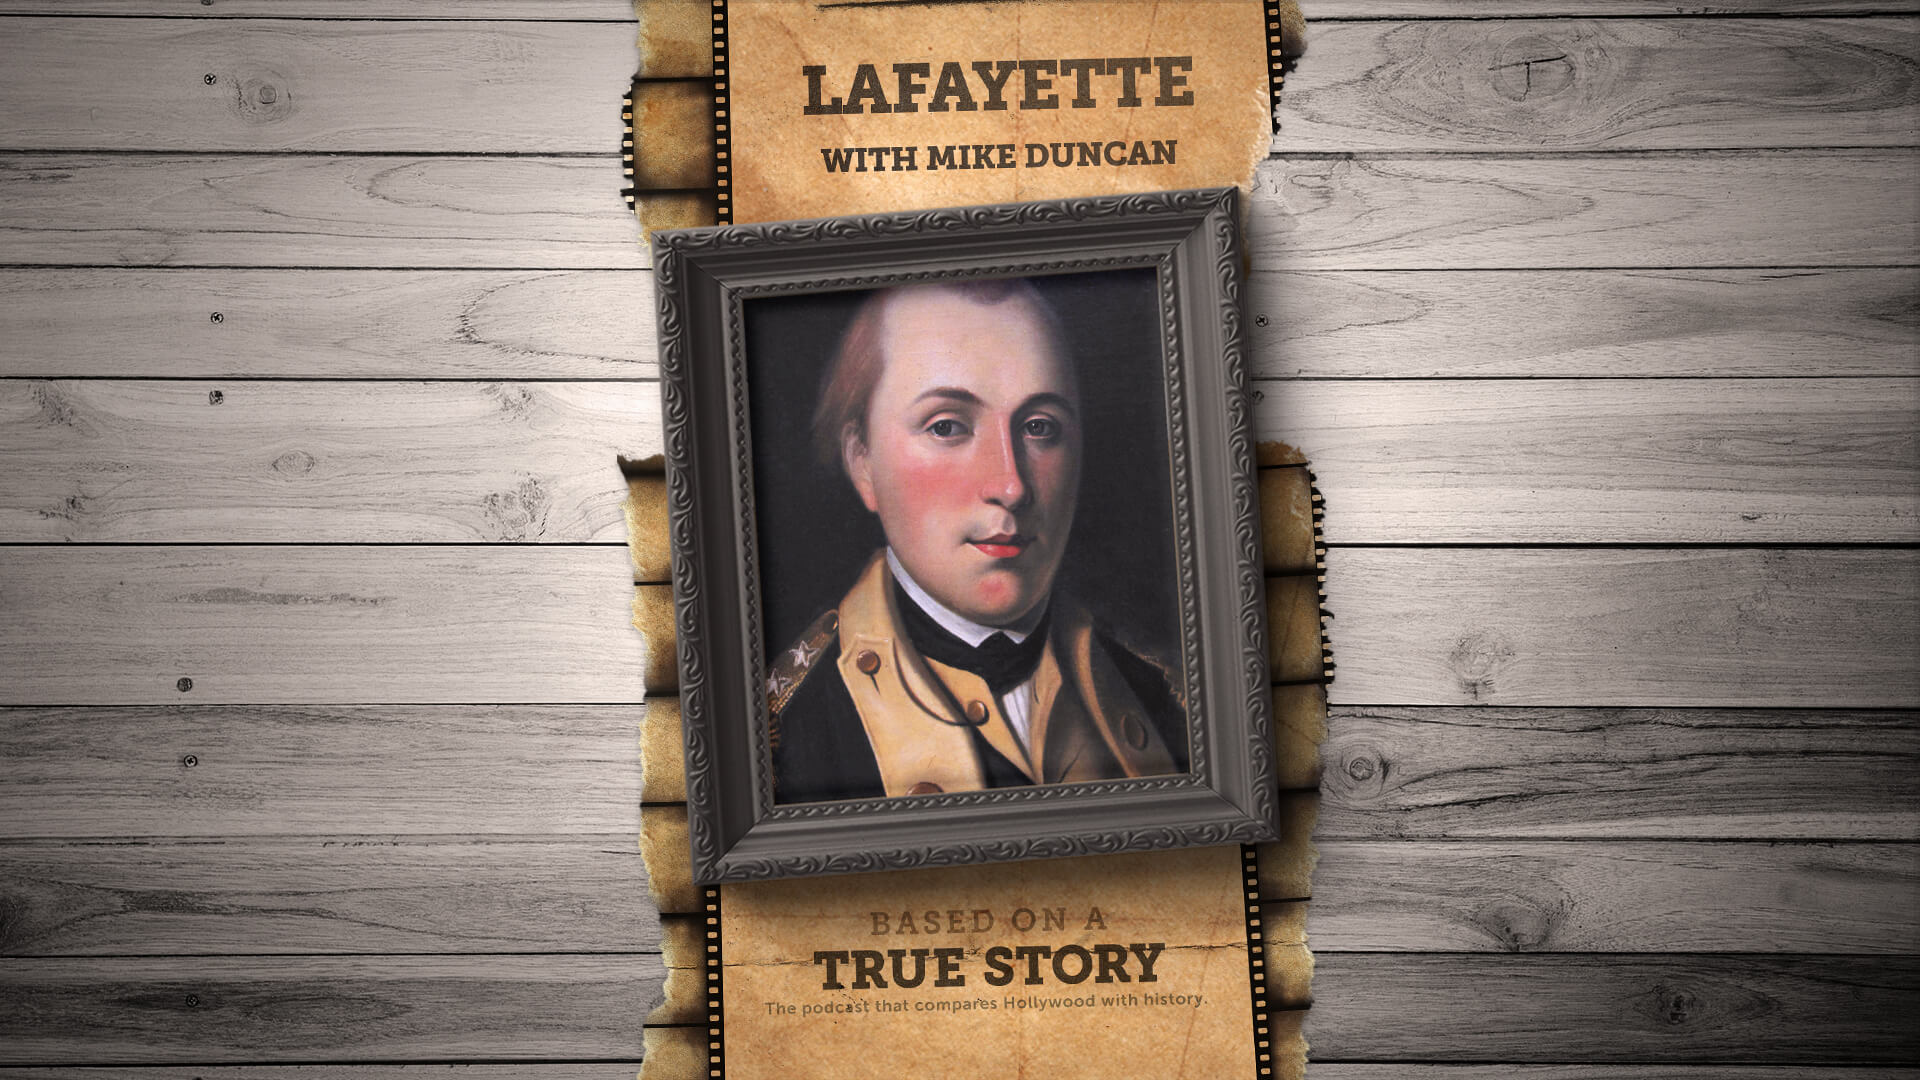 The true story of Lafayette